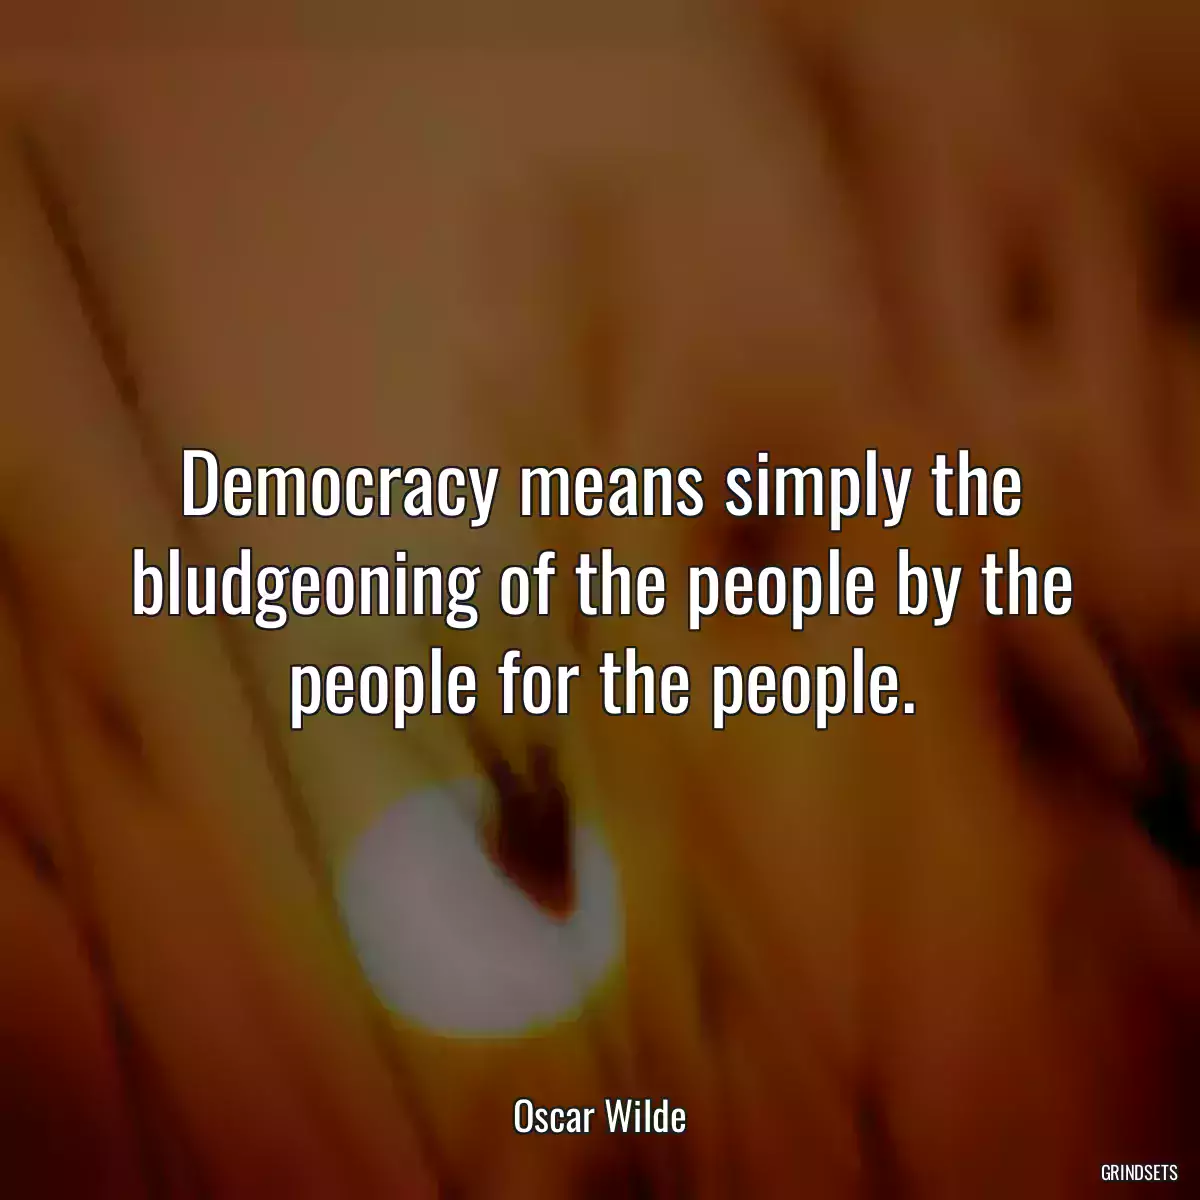 Democracy means simply the bludgeoning of the people by the people for the people.